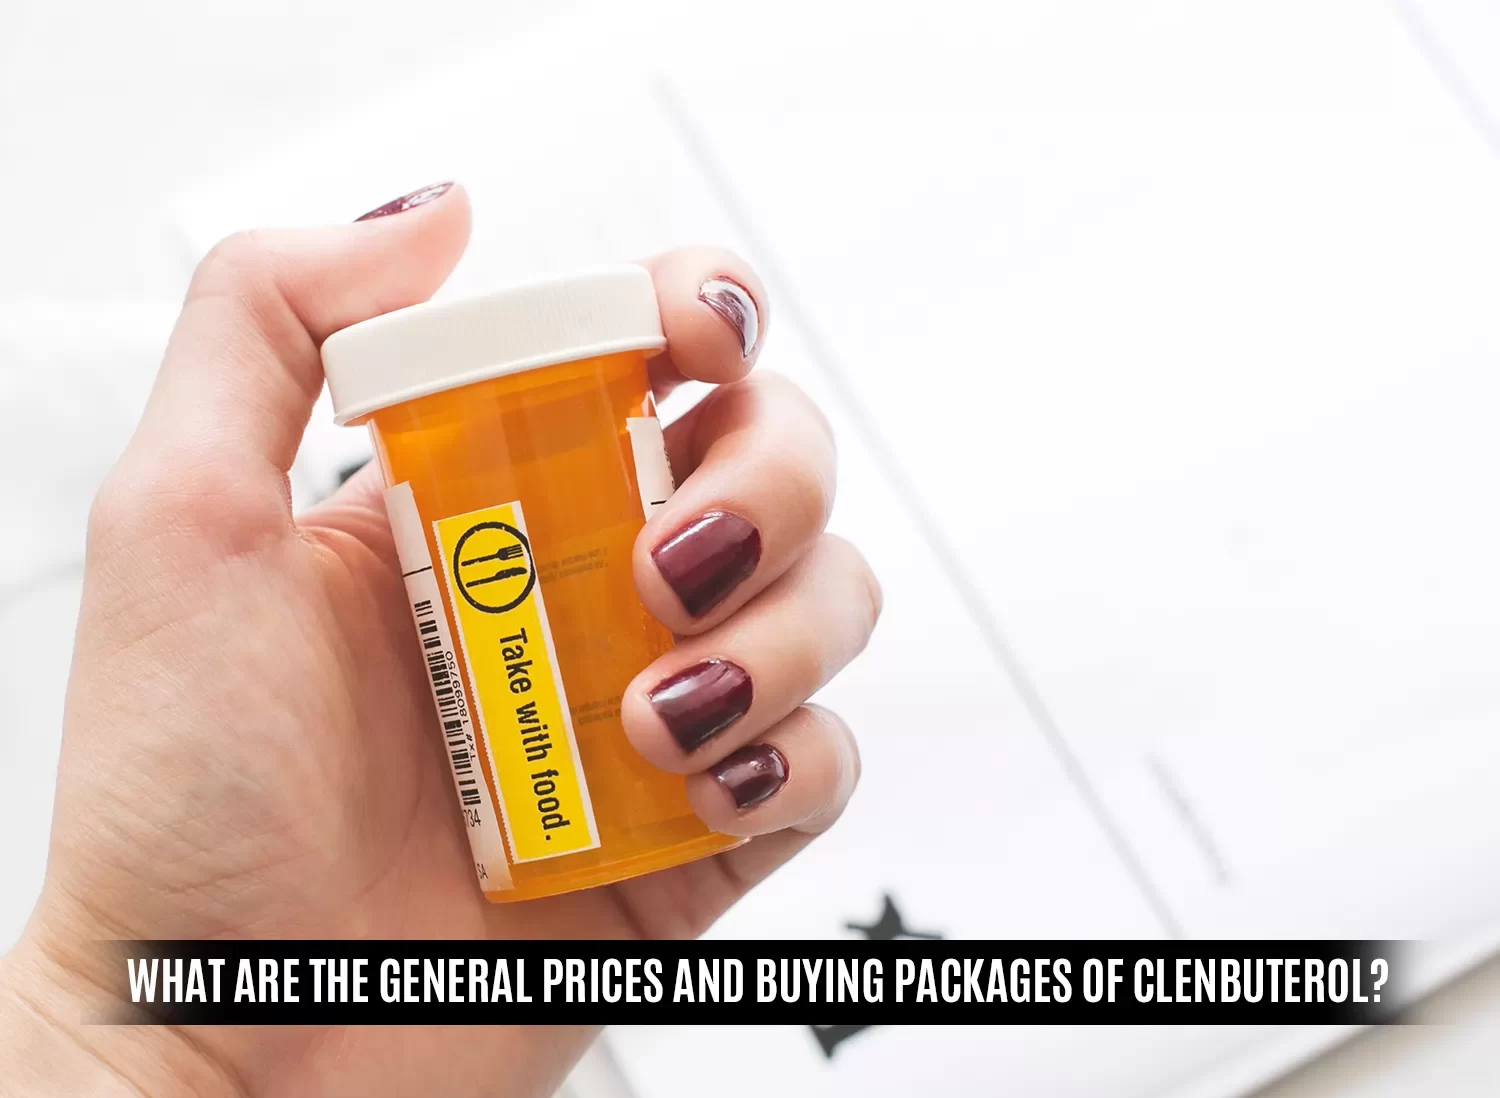 Prices and buying packages of Clenbuterol